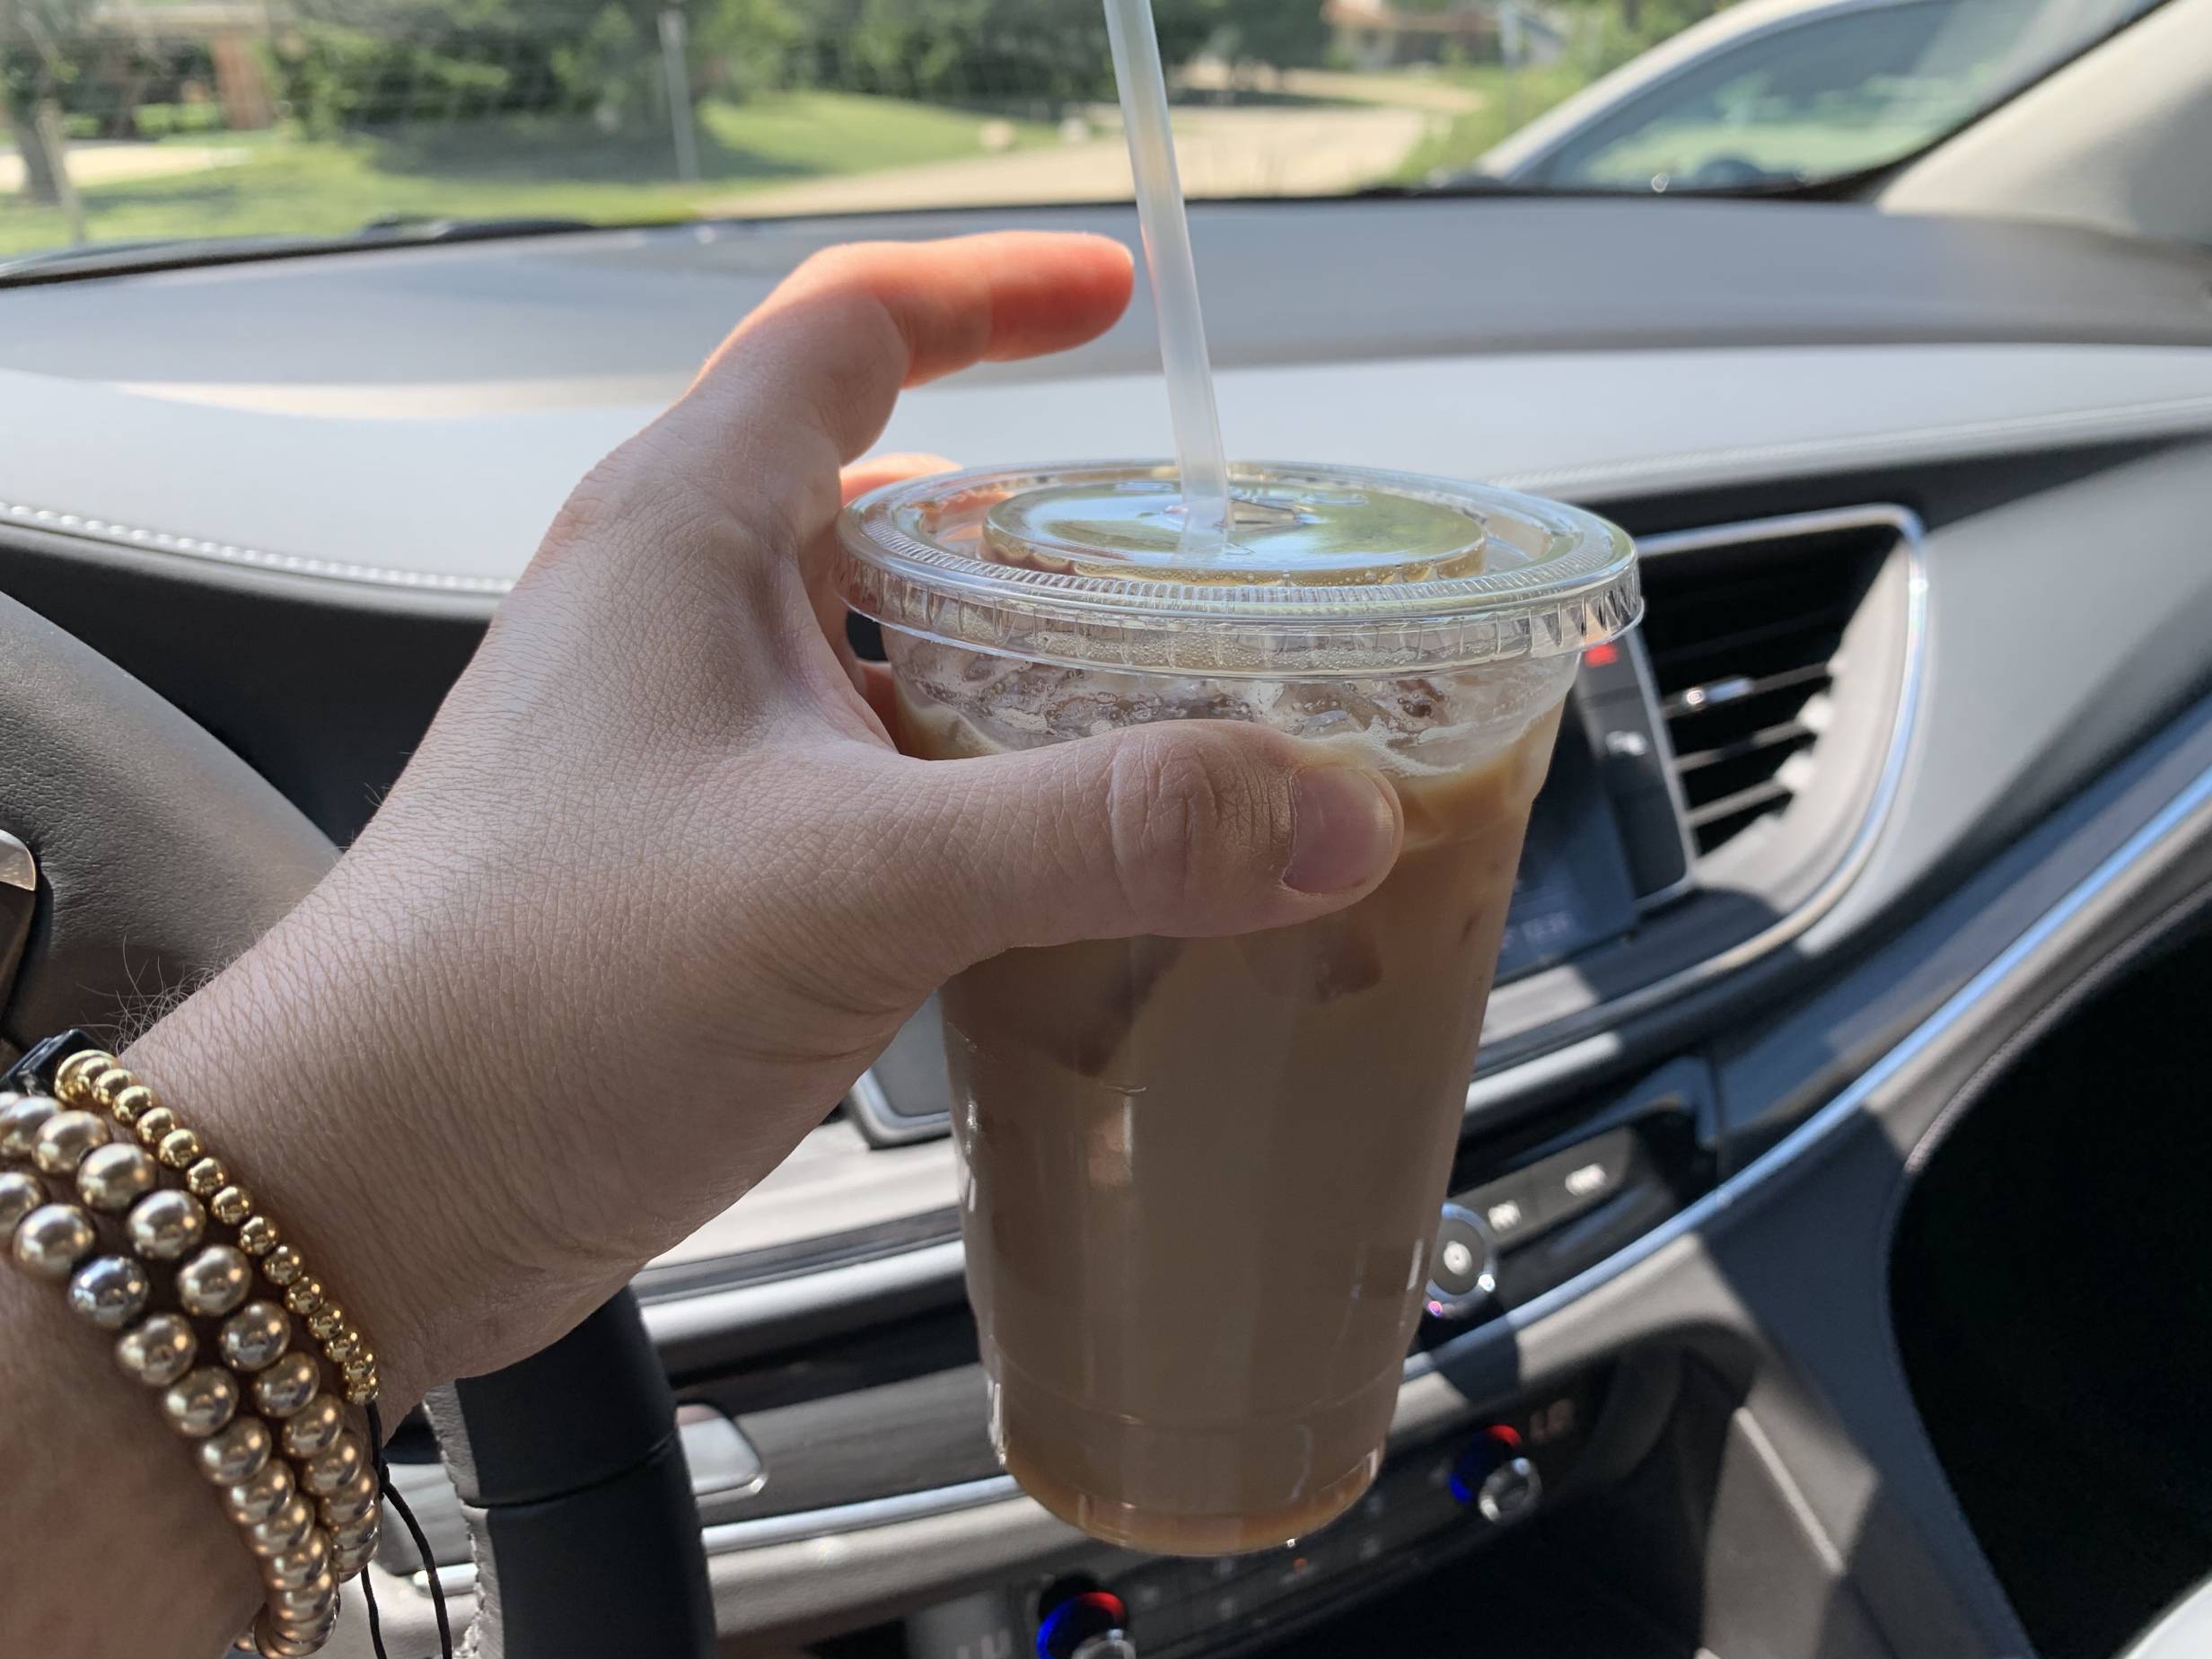 The author holds a large iced caramel latte with skim milk and caramel from Art Mart in her vehicle. Photo by Stephanie Wheatley.